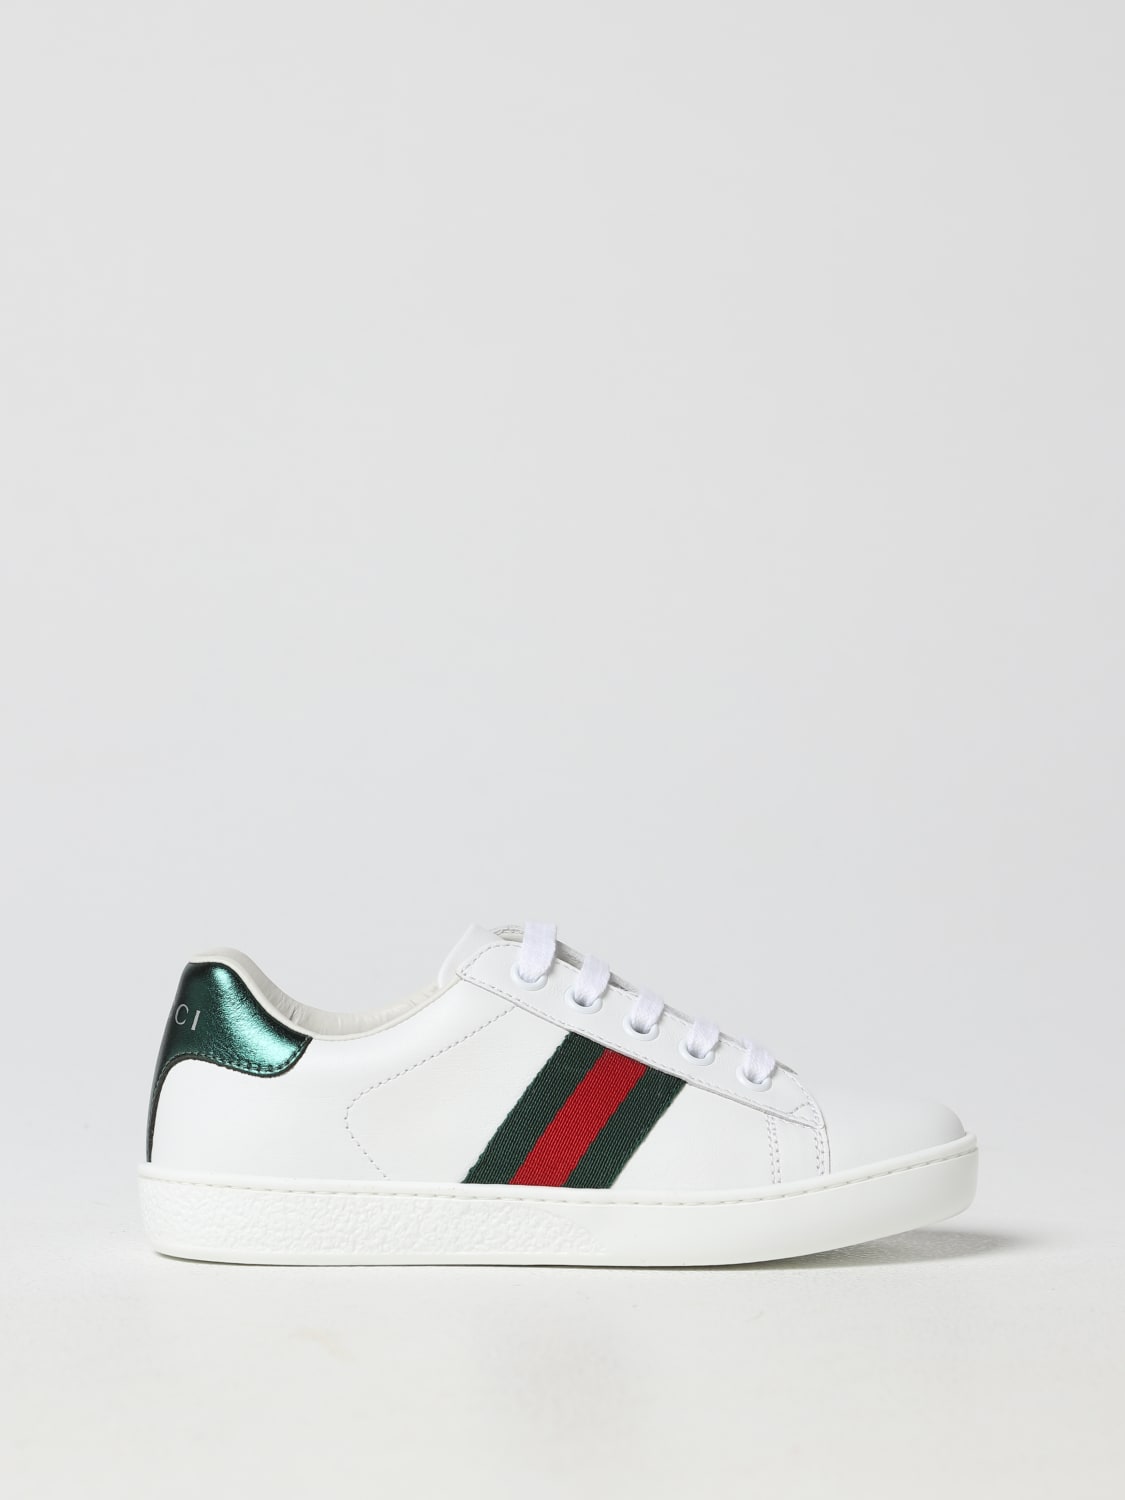 leather sneakers - White | Gucci sneakers 433148CPWE0 online at GIGLIO.COM